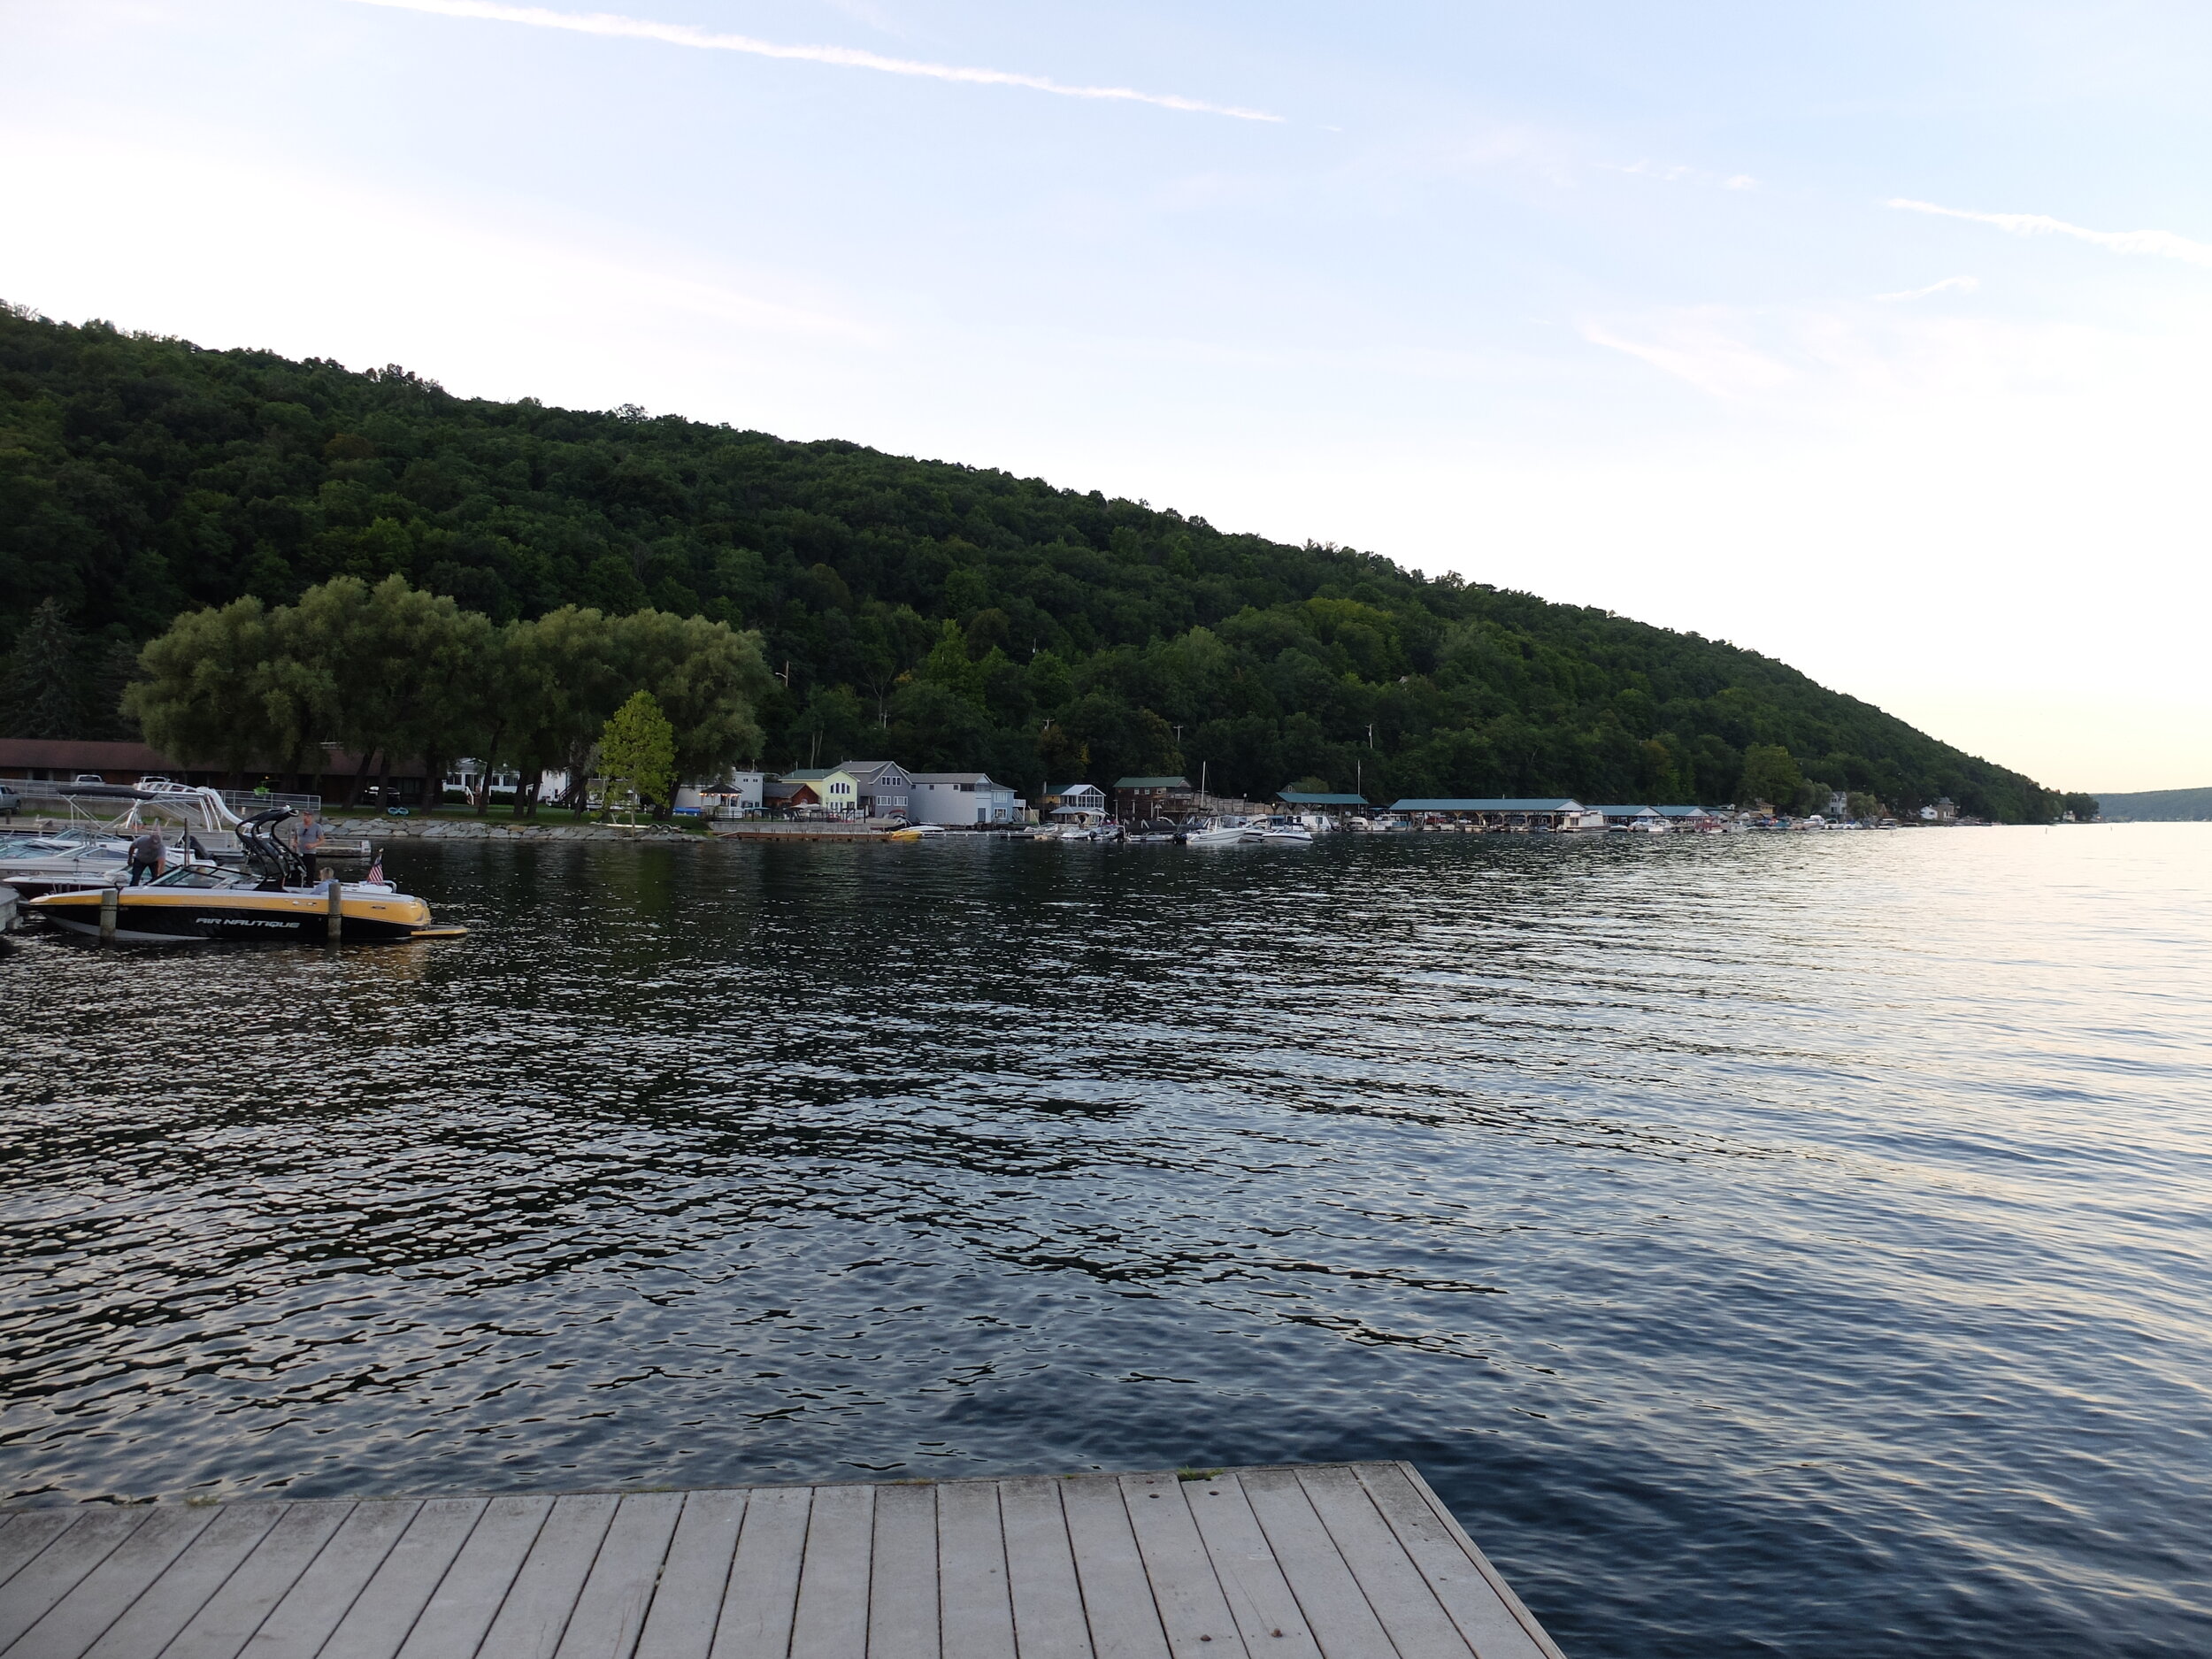 The town is on the southern tip of Keuka (Kew-ka) Lake.  It was a perfect spot for testing Curtiss' seaplanes.